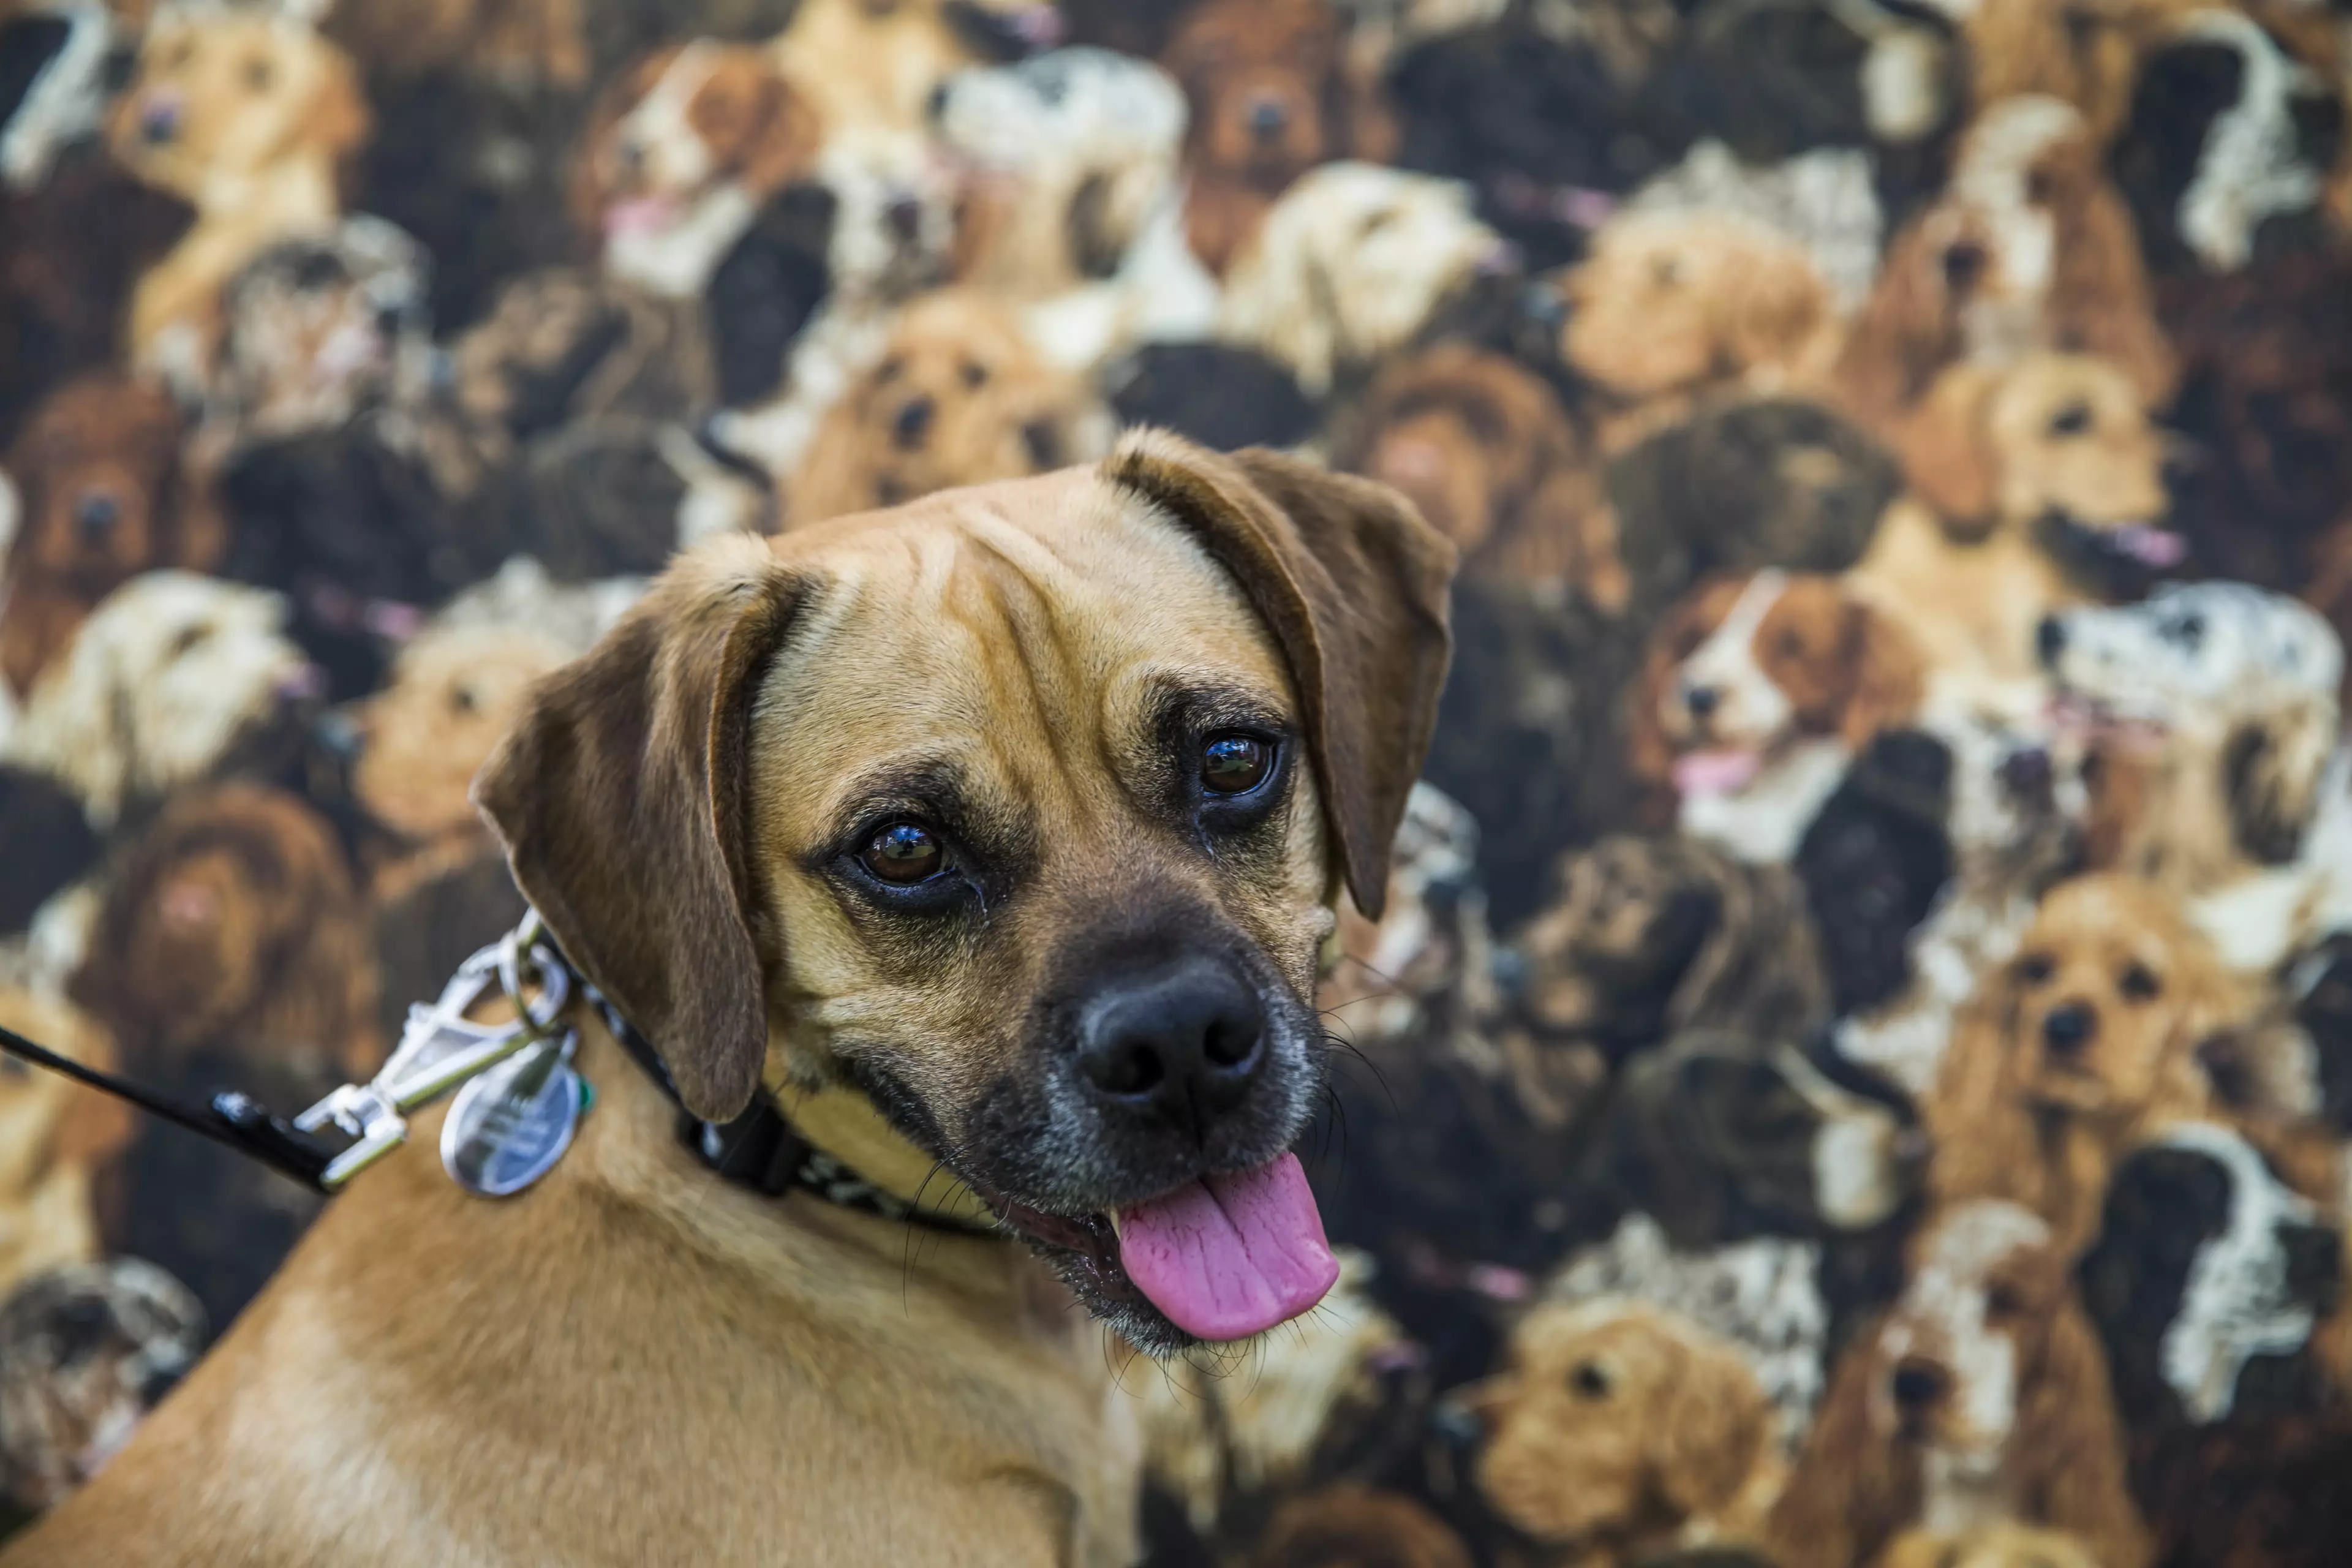 A puggle - cute, but why are we making weird breeds of dogs.